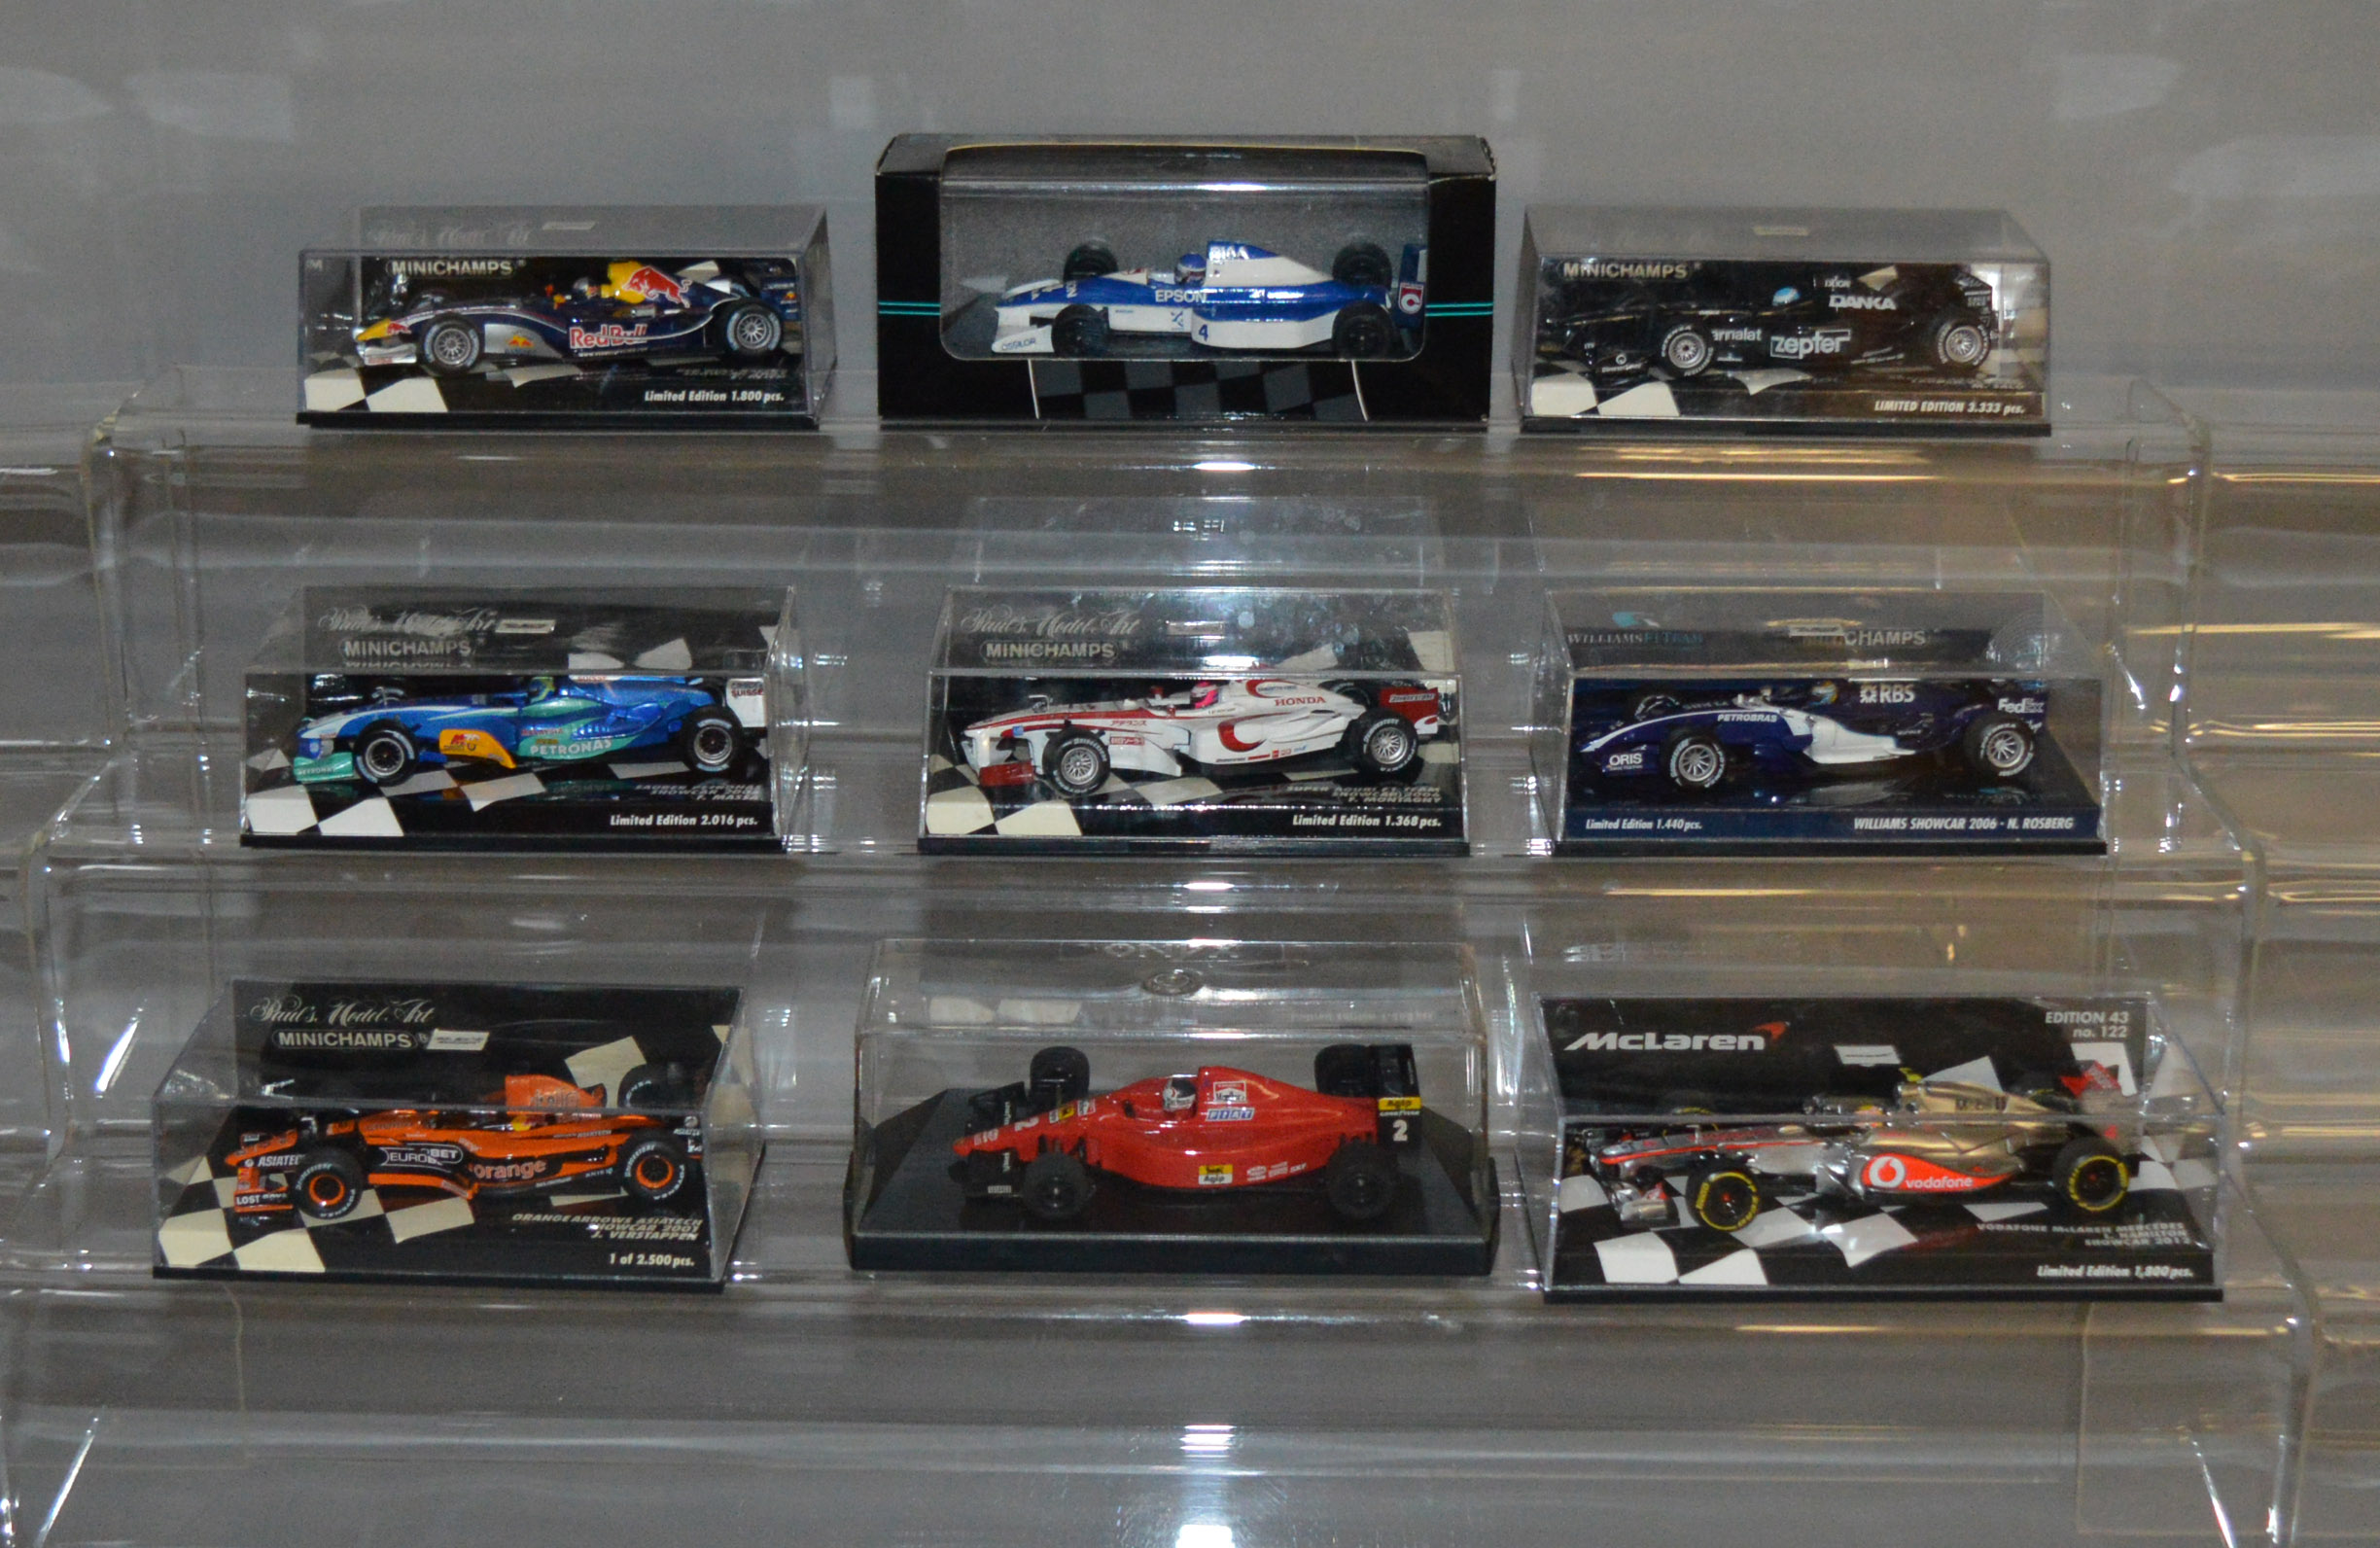 7 boxed Minichamps/ Pauls Model Art Formula 1 diecast racing car models in 1:43 scale together with